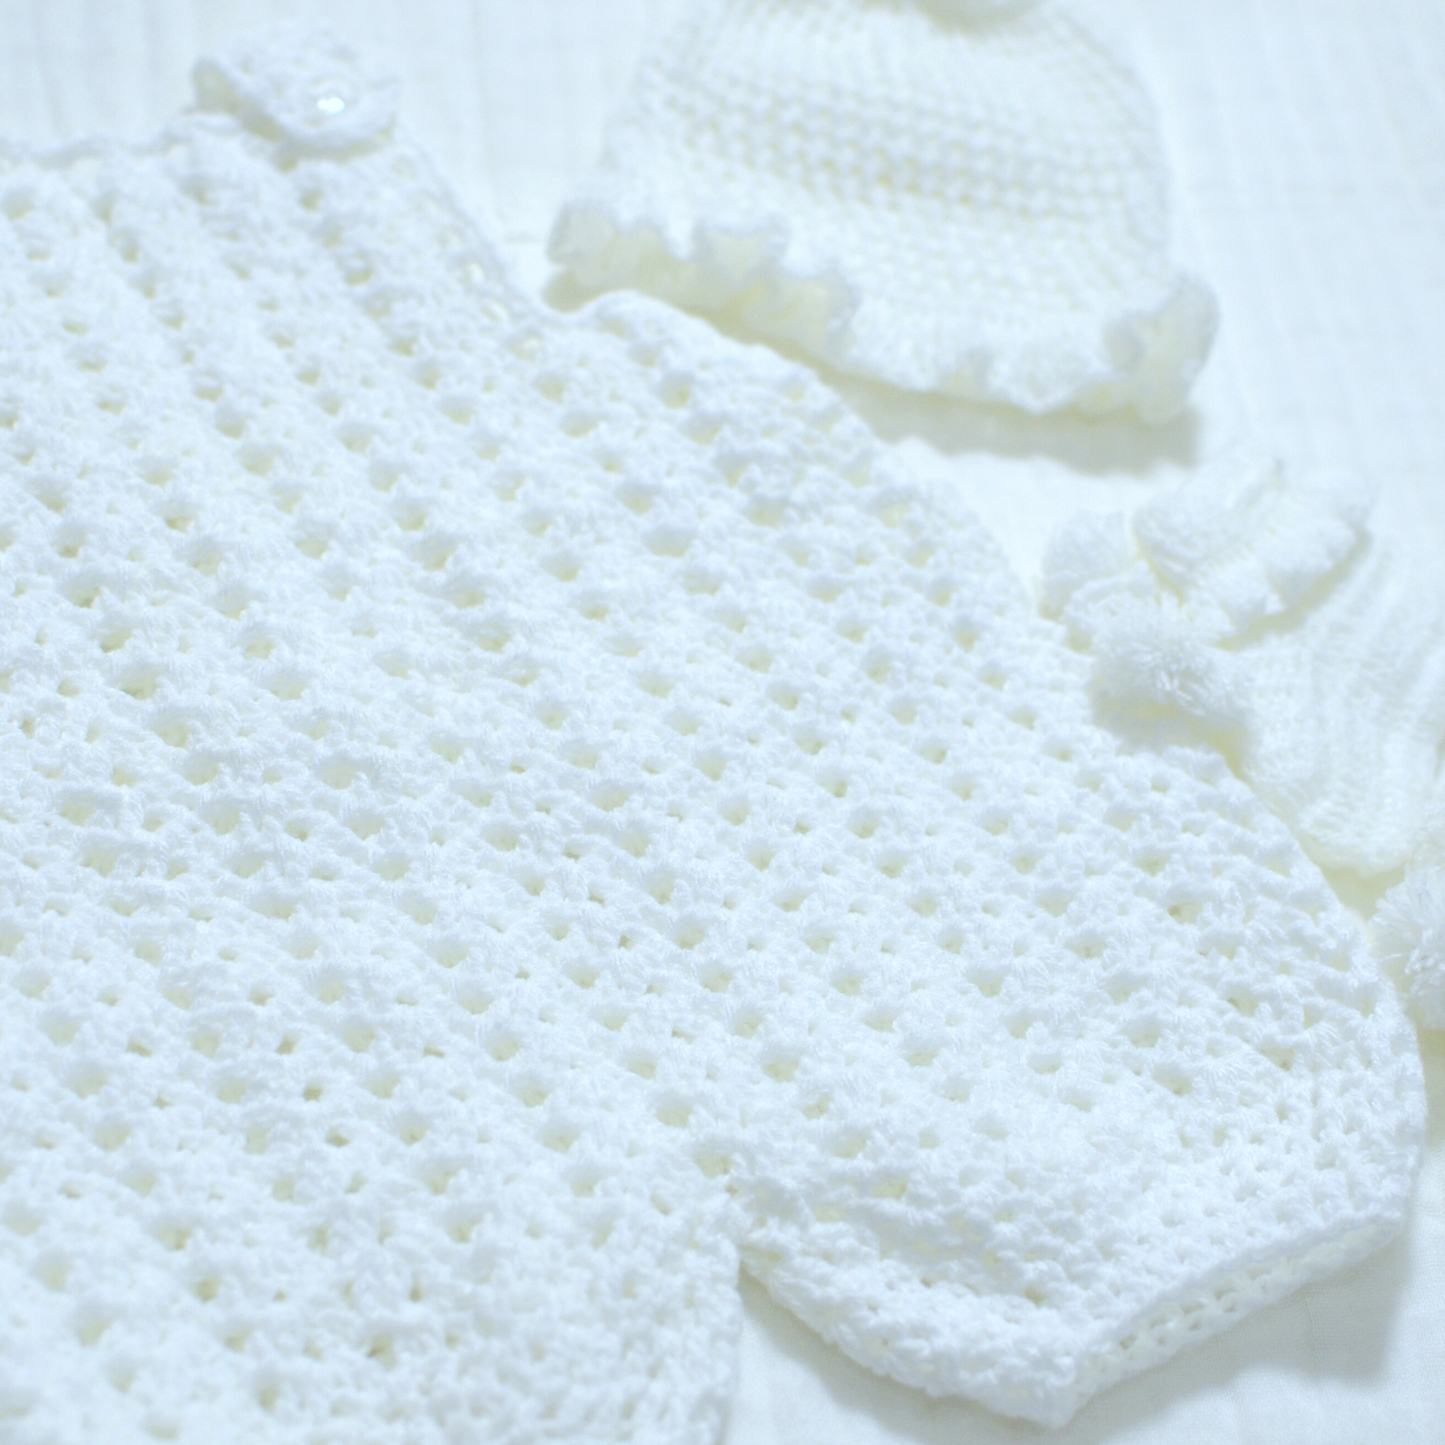 Crochet Baby Dungaree and Hat Socks - 0 to 3 month size